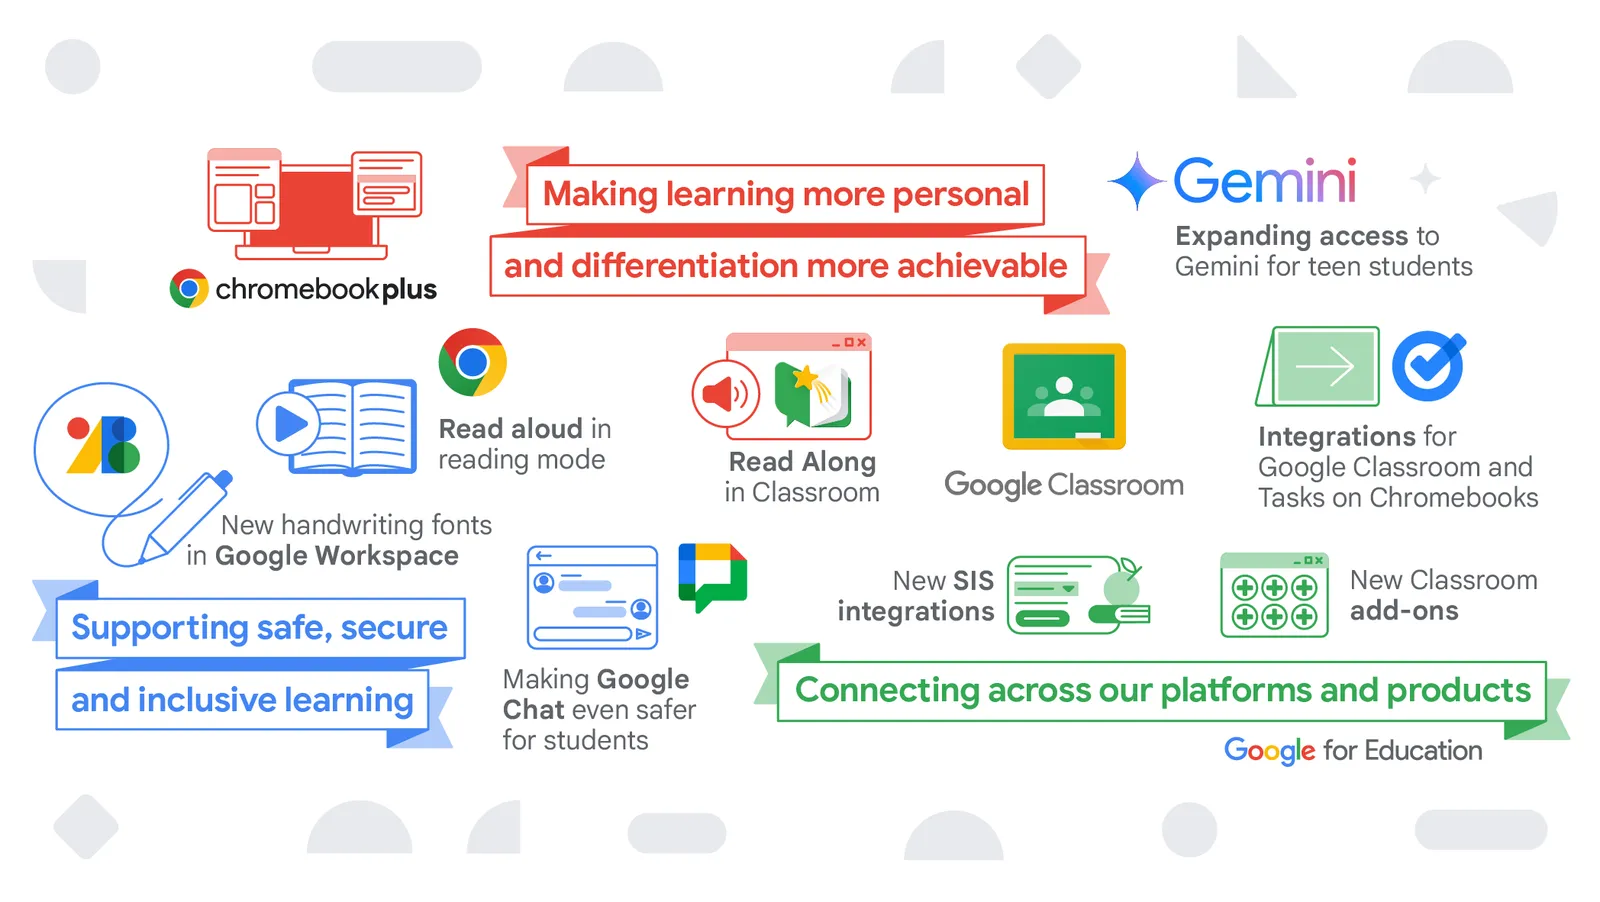 Google for Education features various tools and enhancements, including Chromebook Plus, Google Classroom, and Gemini AI for personalized and inclusive learning.